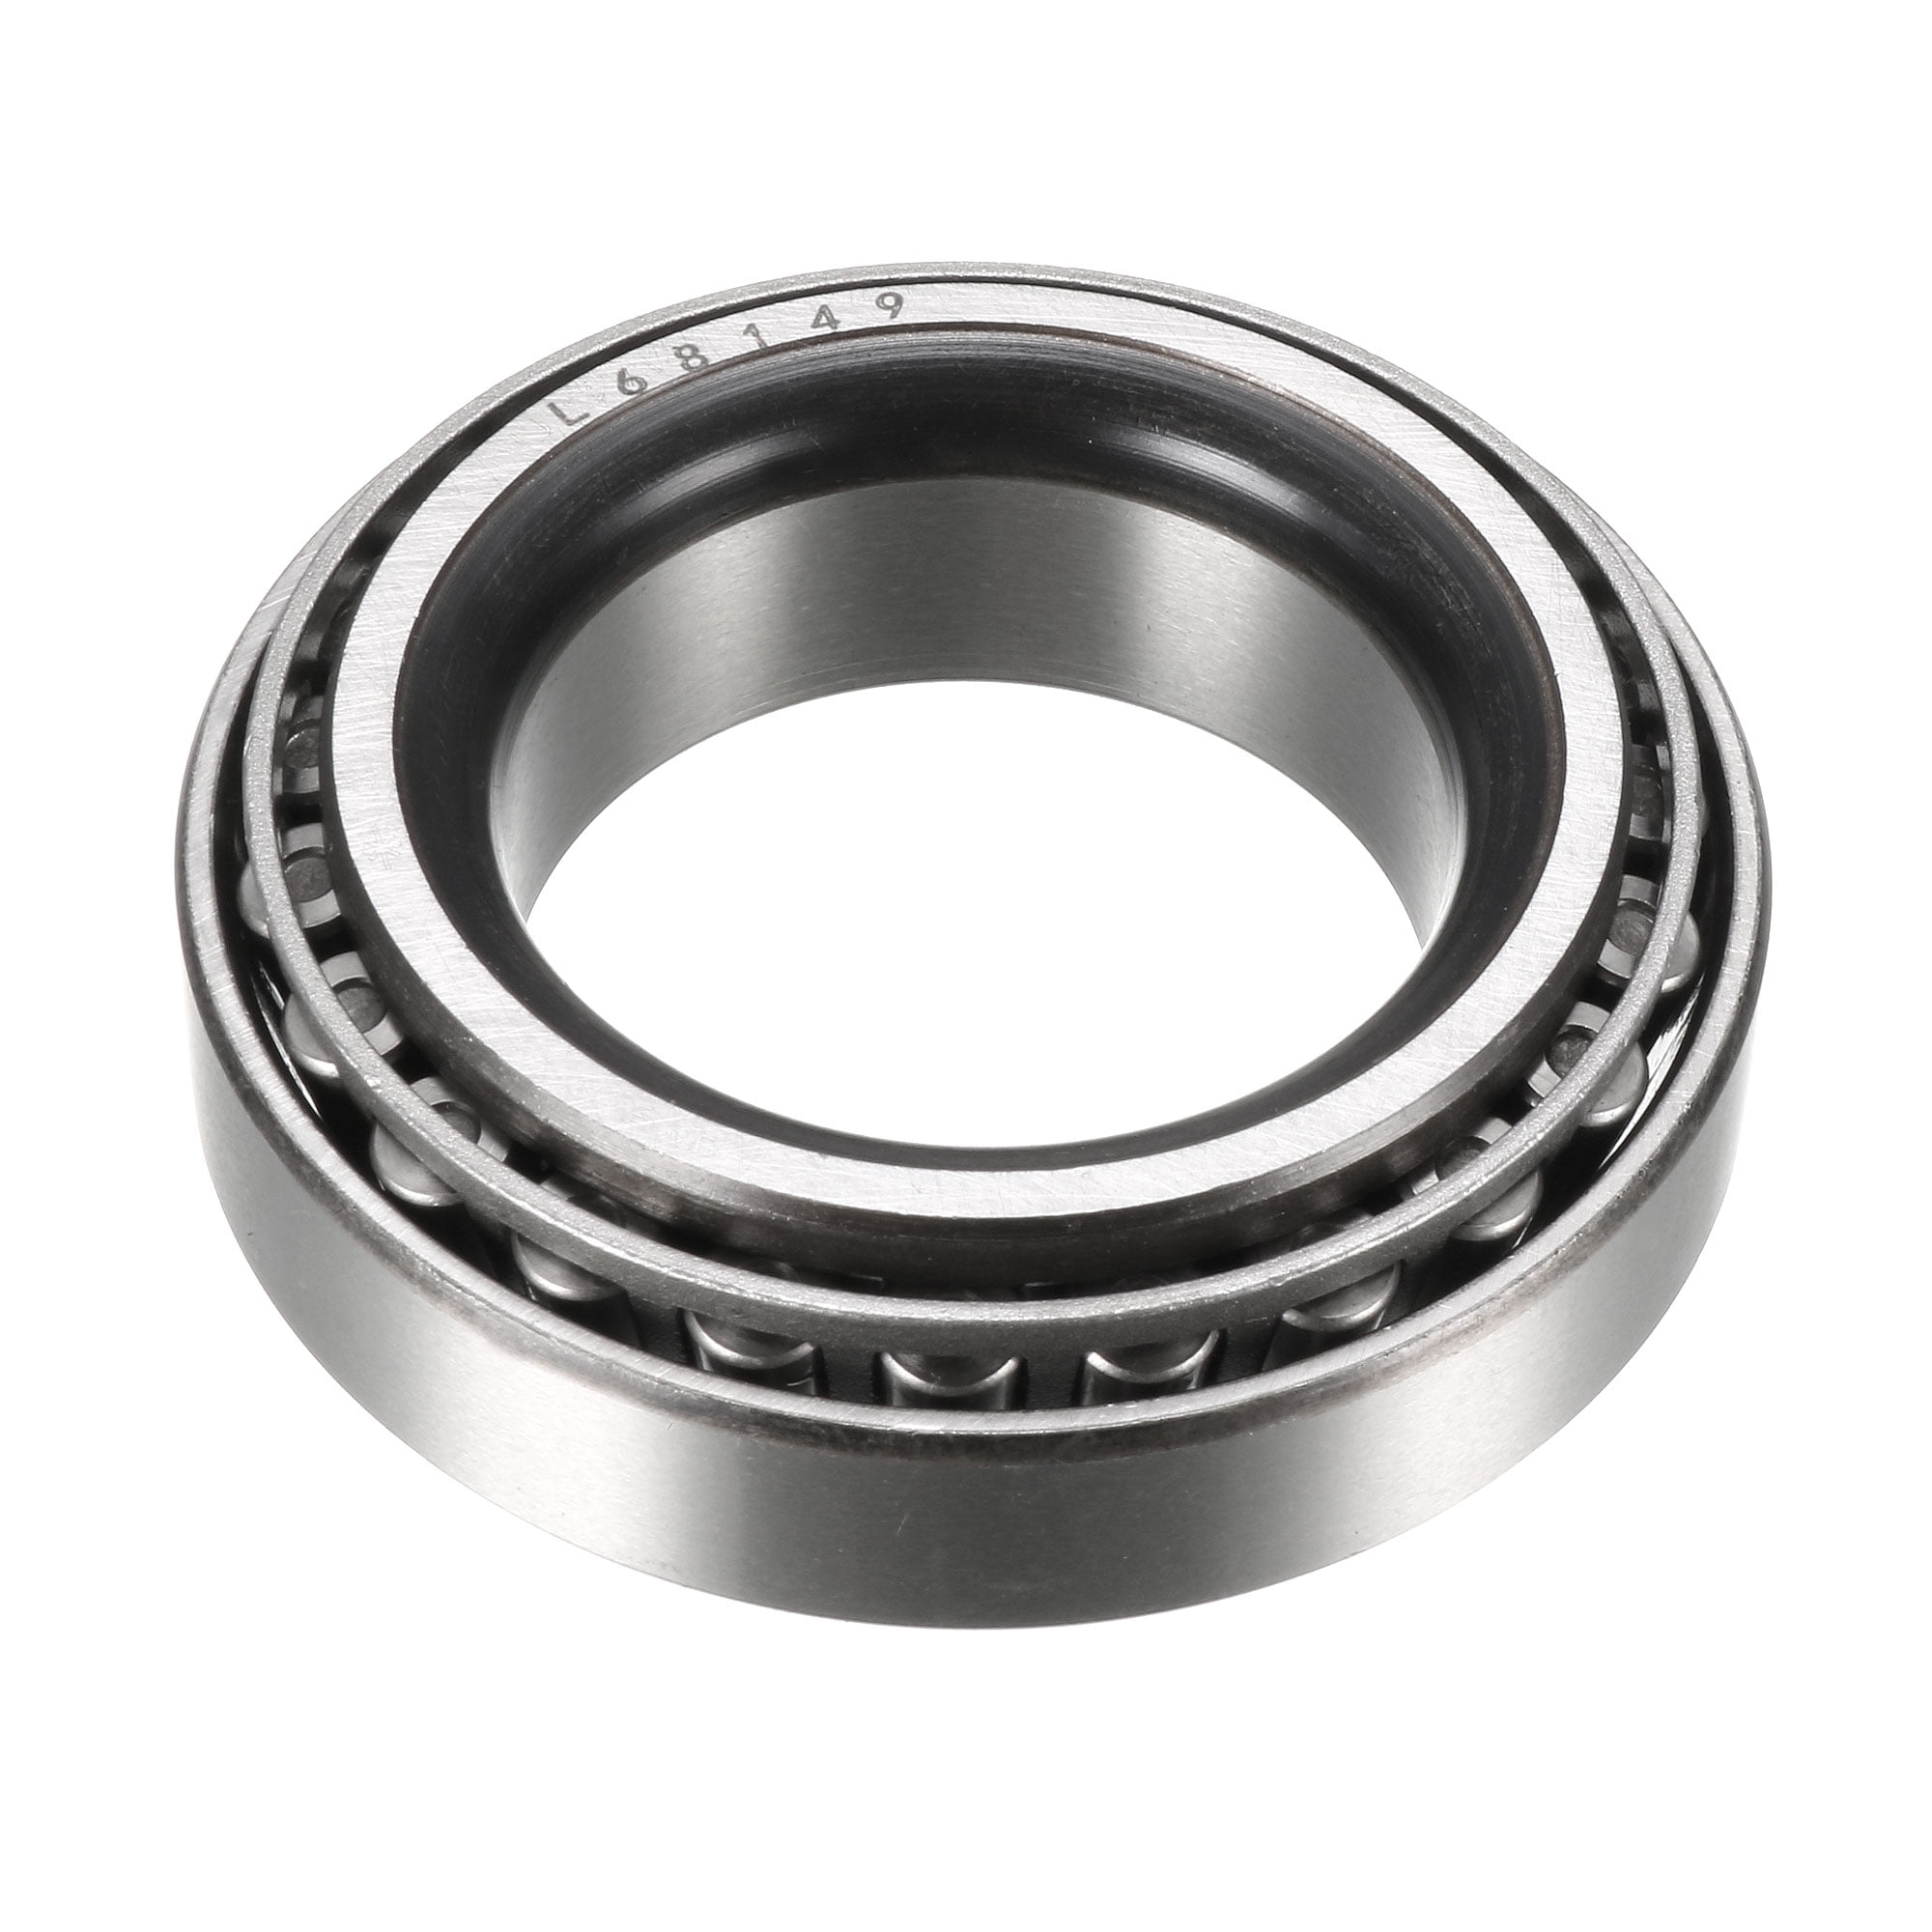 Major Brand L44640/L44610 Inch Taper Roller Bearing Cup/Cone Set 